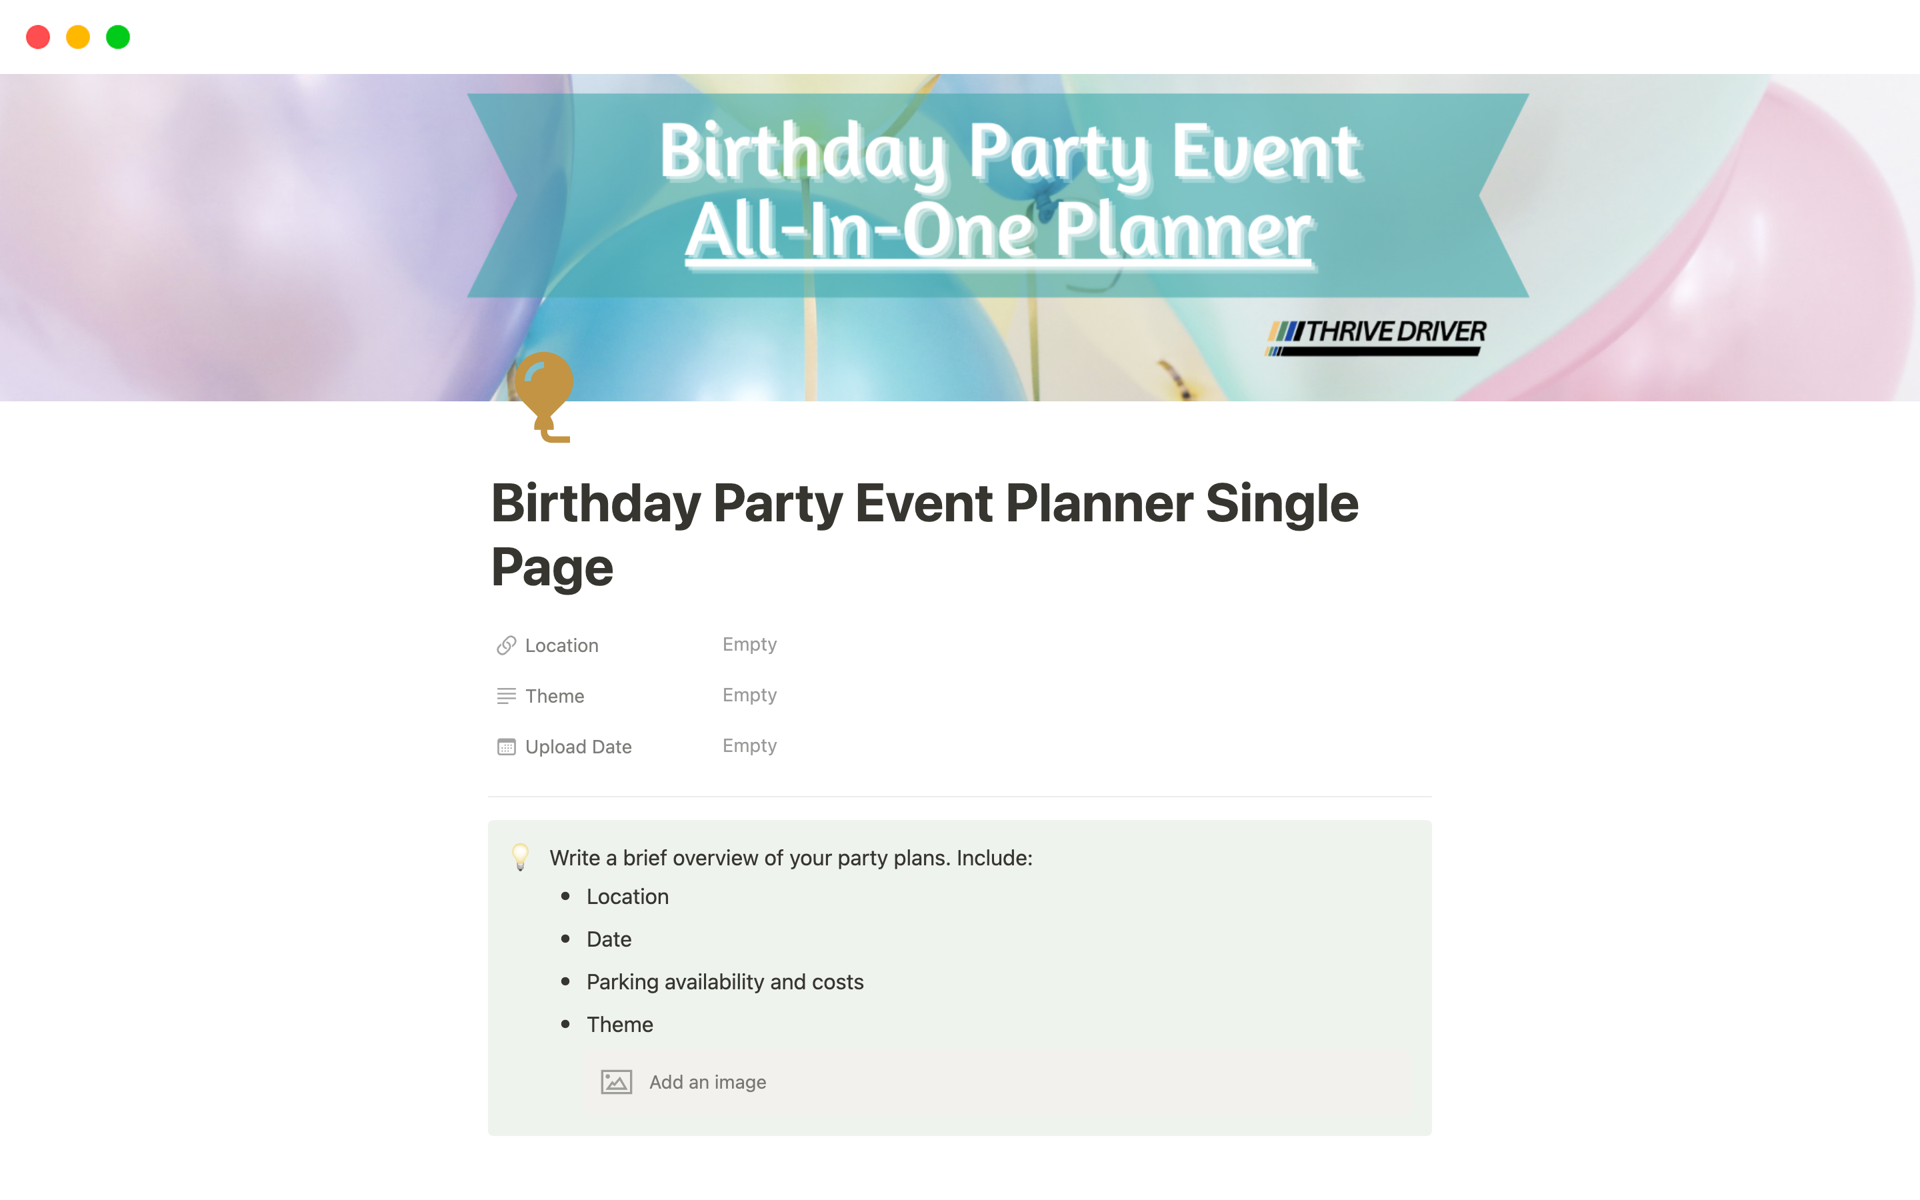 Buy this all-in-one party and event planning Notion template tailored for birthdays to organize each facet of your celebration. 